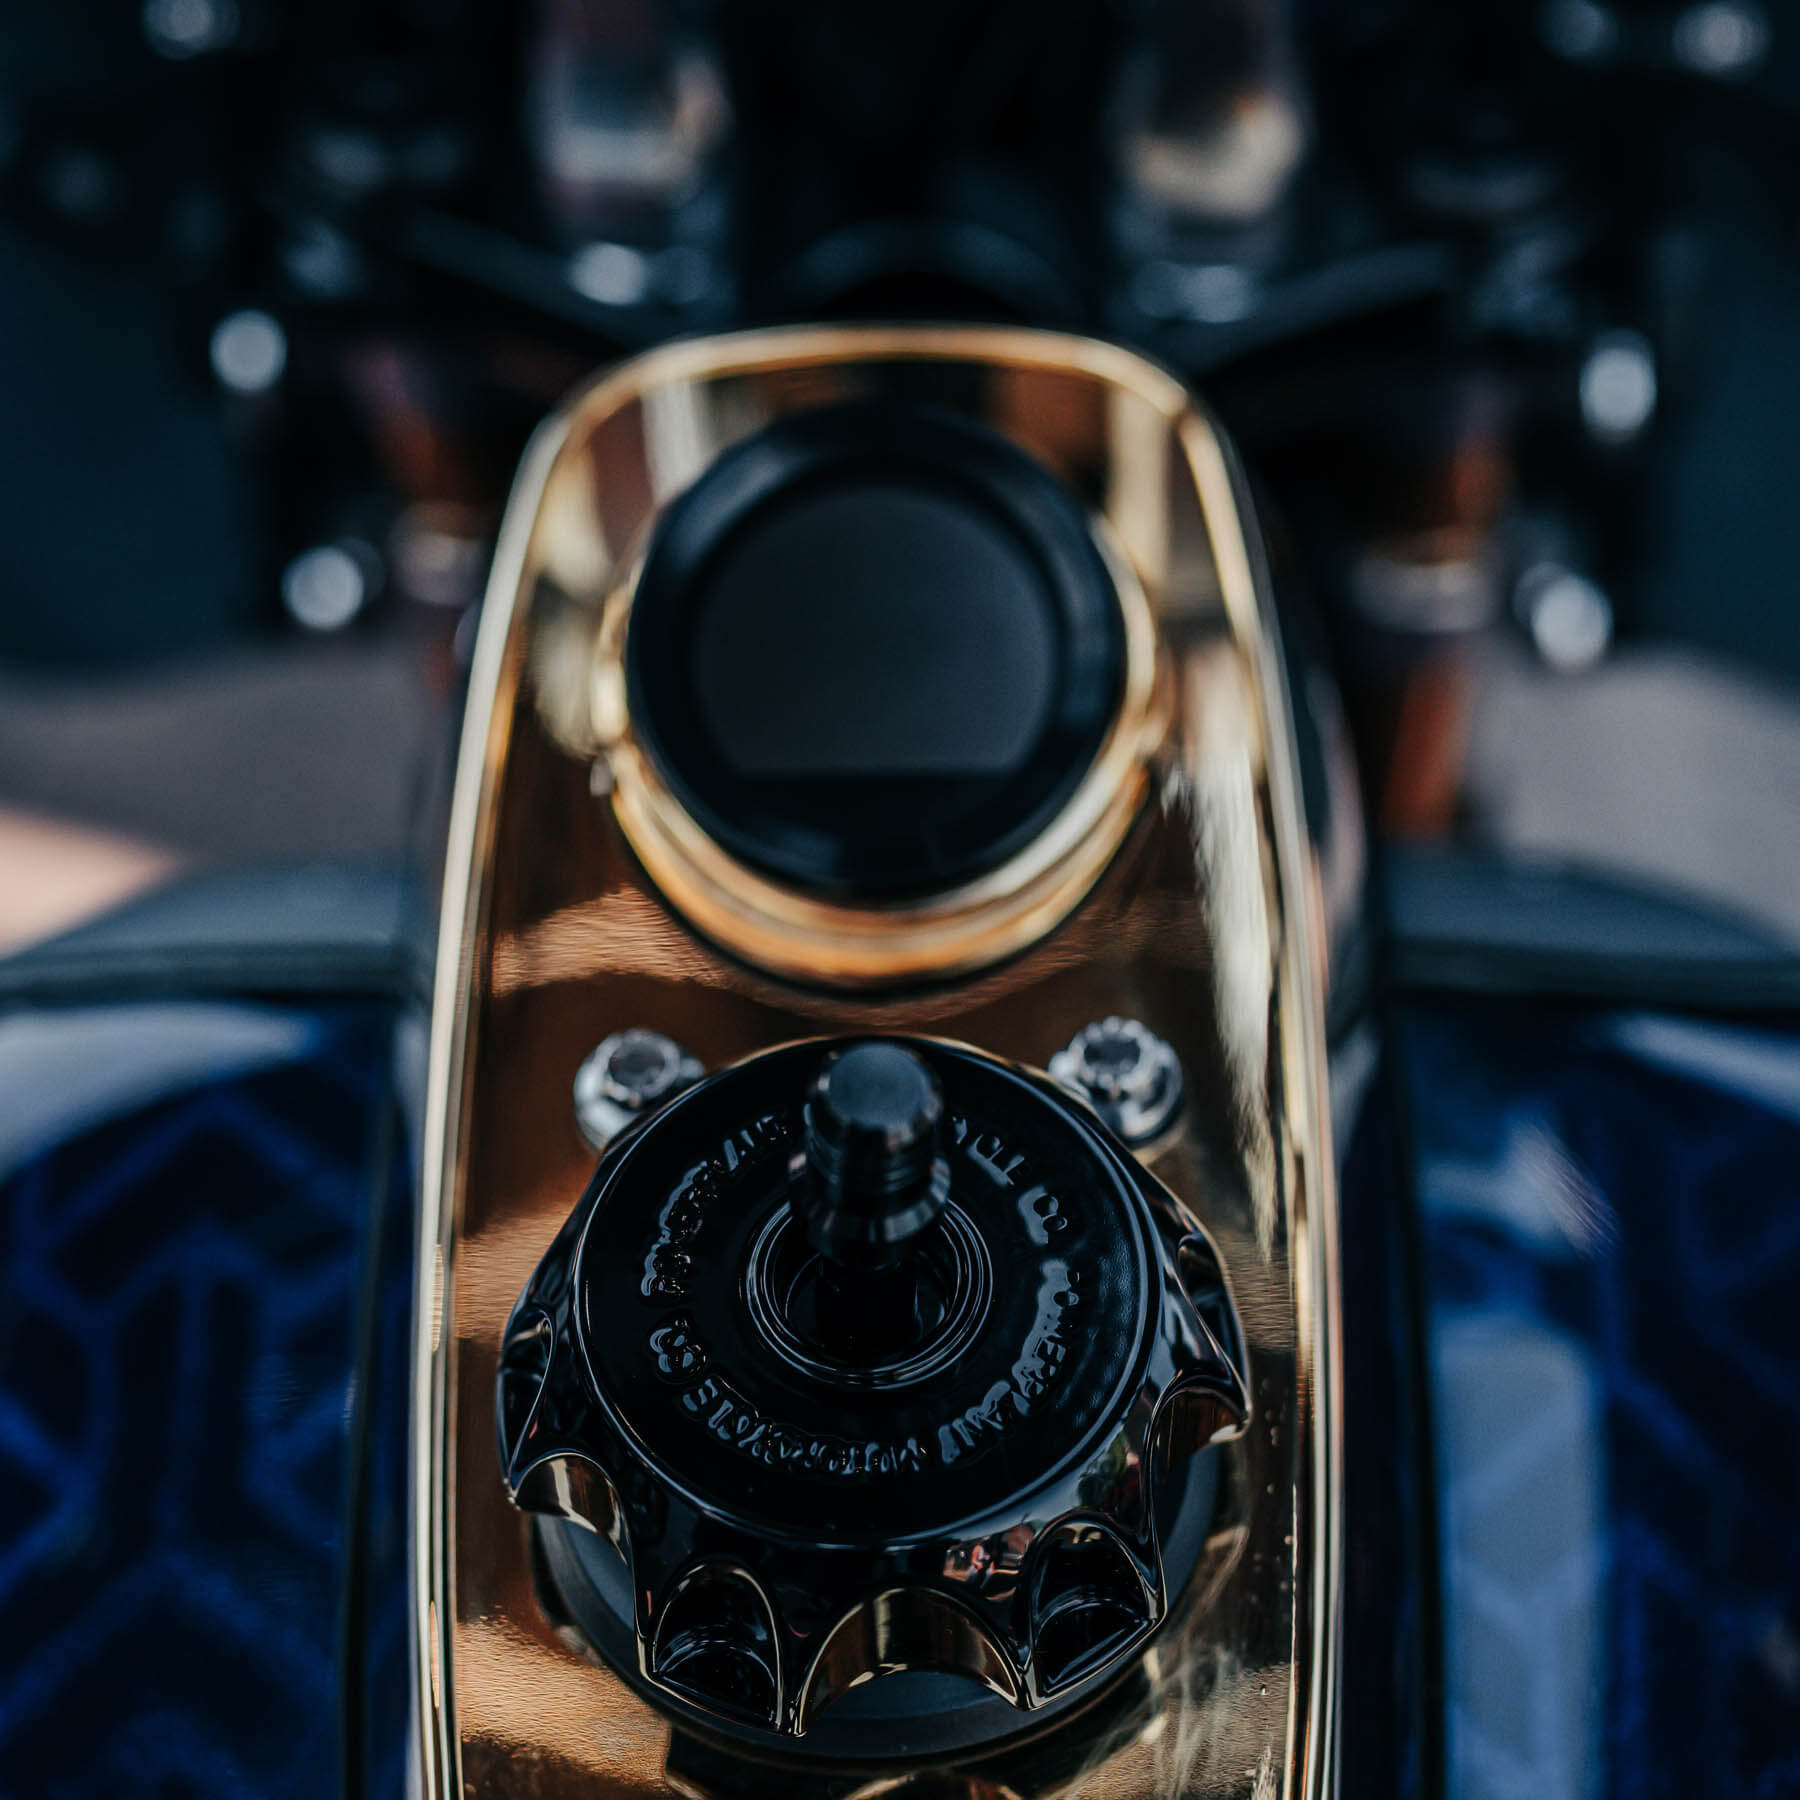 Gold plated Harley FXR dash with black moto style gas cap and black Koso digital fuel gauge on gas tank with blue and black Escher pattern paint job.